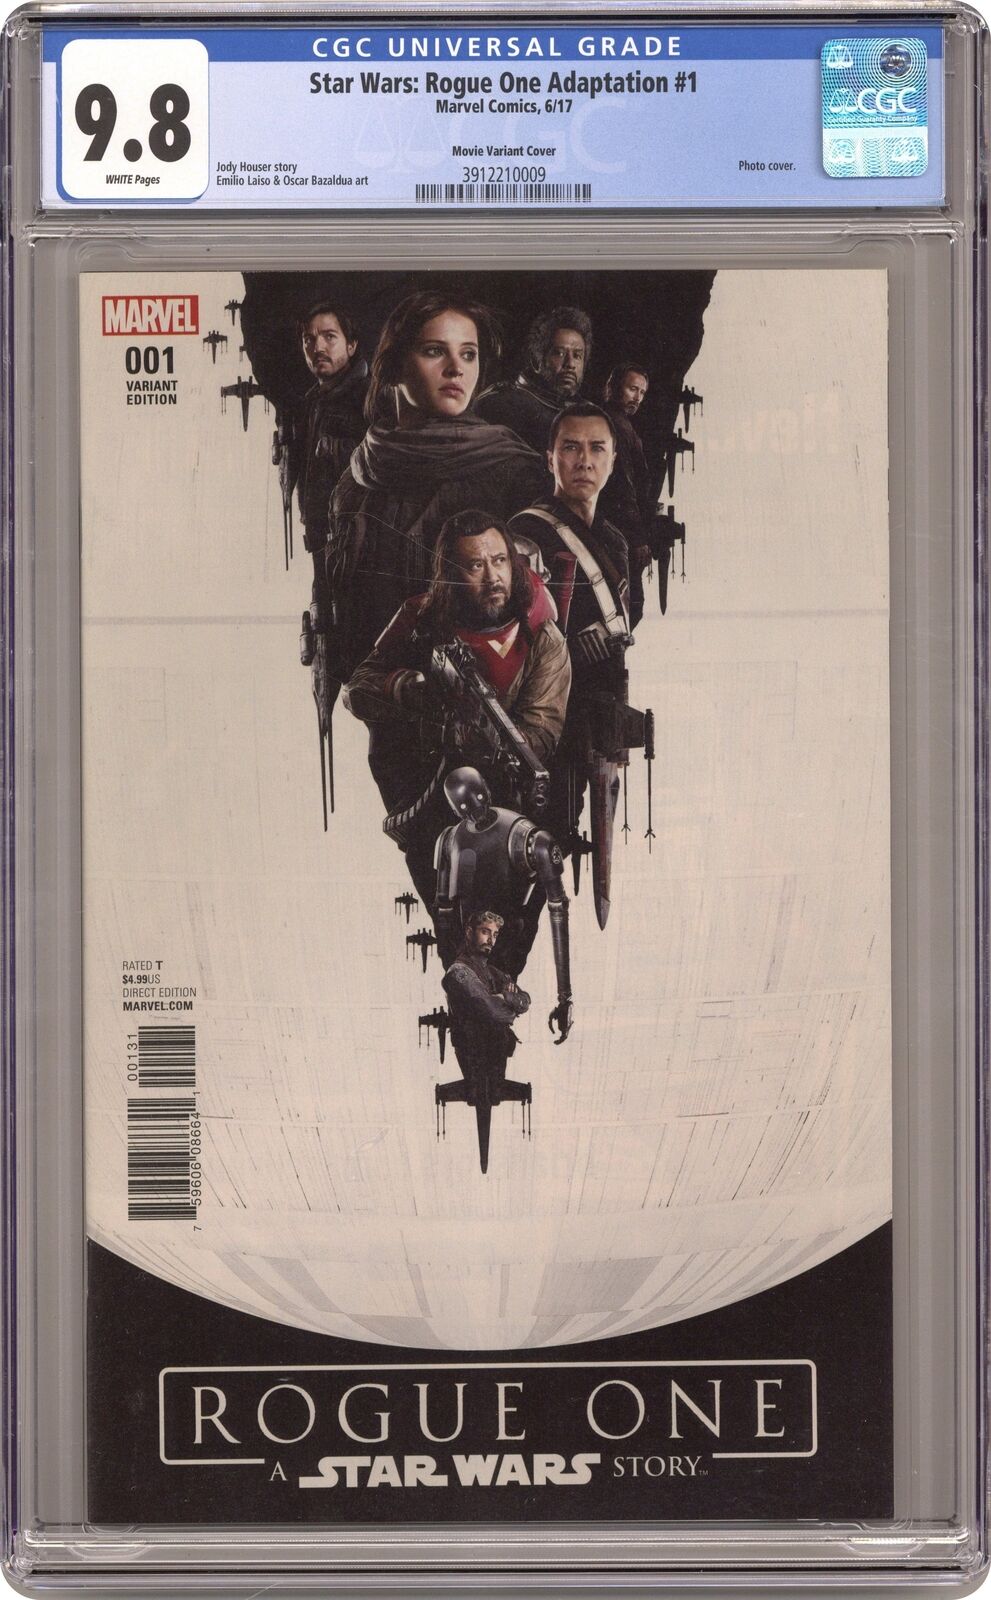 Star Wars Rogue One 1D Photo 1:15 Variant CGC 9.8 2017 3912210009